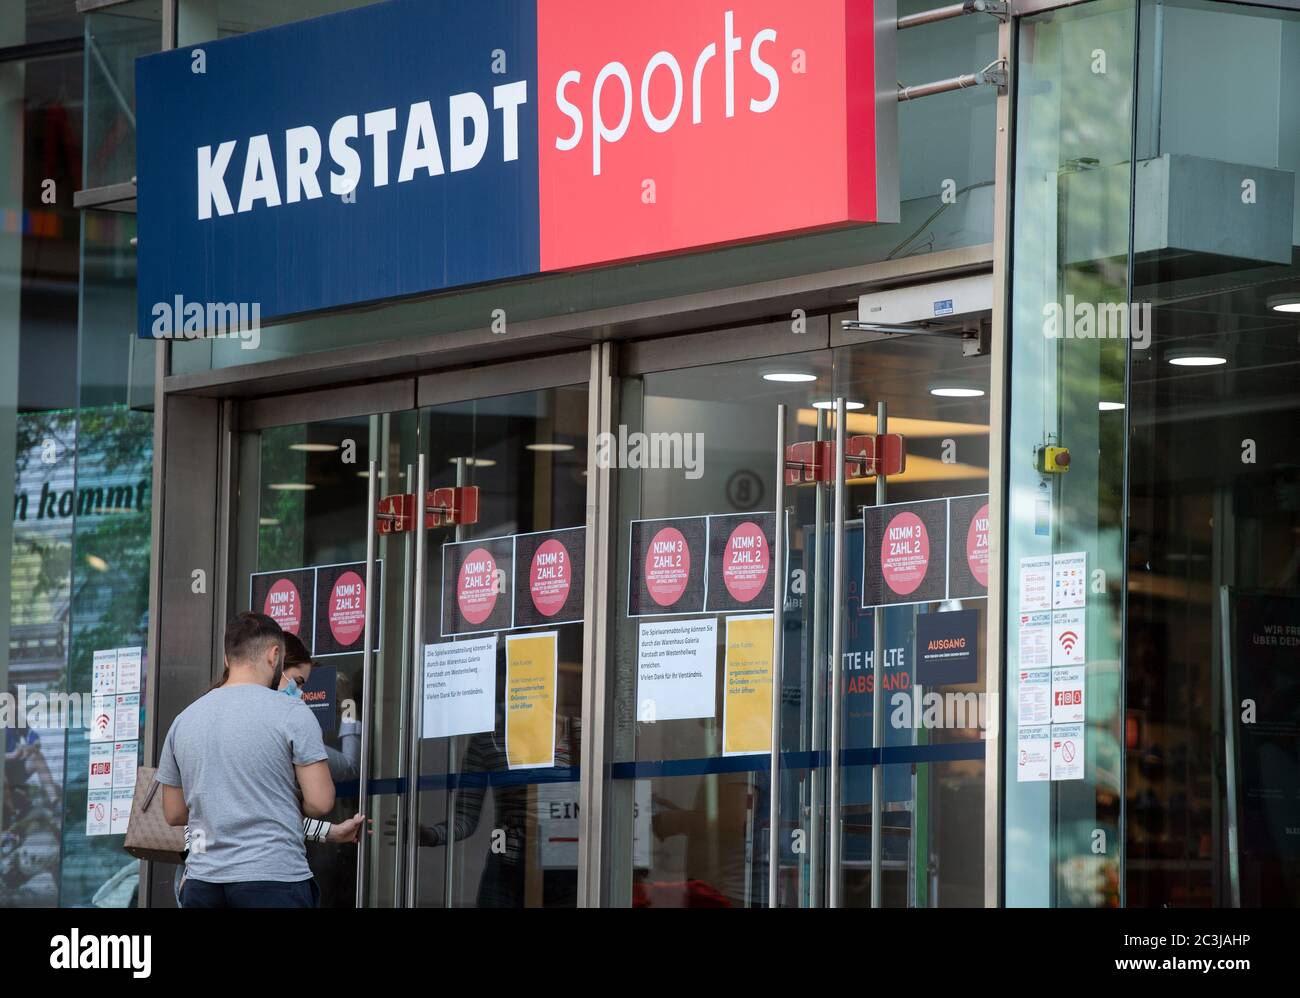 Dortmund, Germany. 20th June, 2020. Two passers-by are standing at an entrance to a Karstadt Sports branch. In addition to the planned closure of dozens of branches of the department store chain Galeria Karstadt Kaufhof, 20 of the 30 branches of the Karstadt Sports subsidiary are also to close. Credit: Bernd Thissen/dpa/Alamy Live News Stock Photo